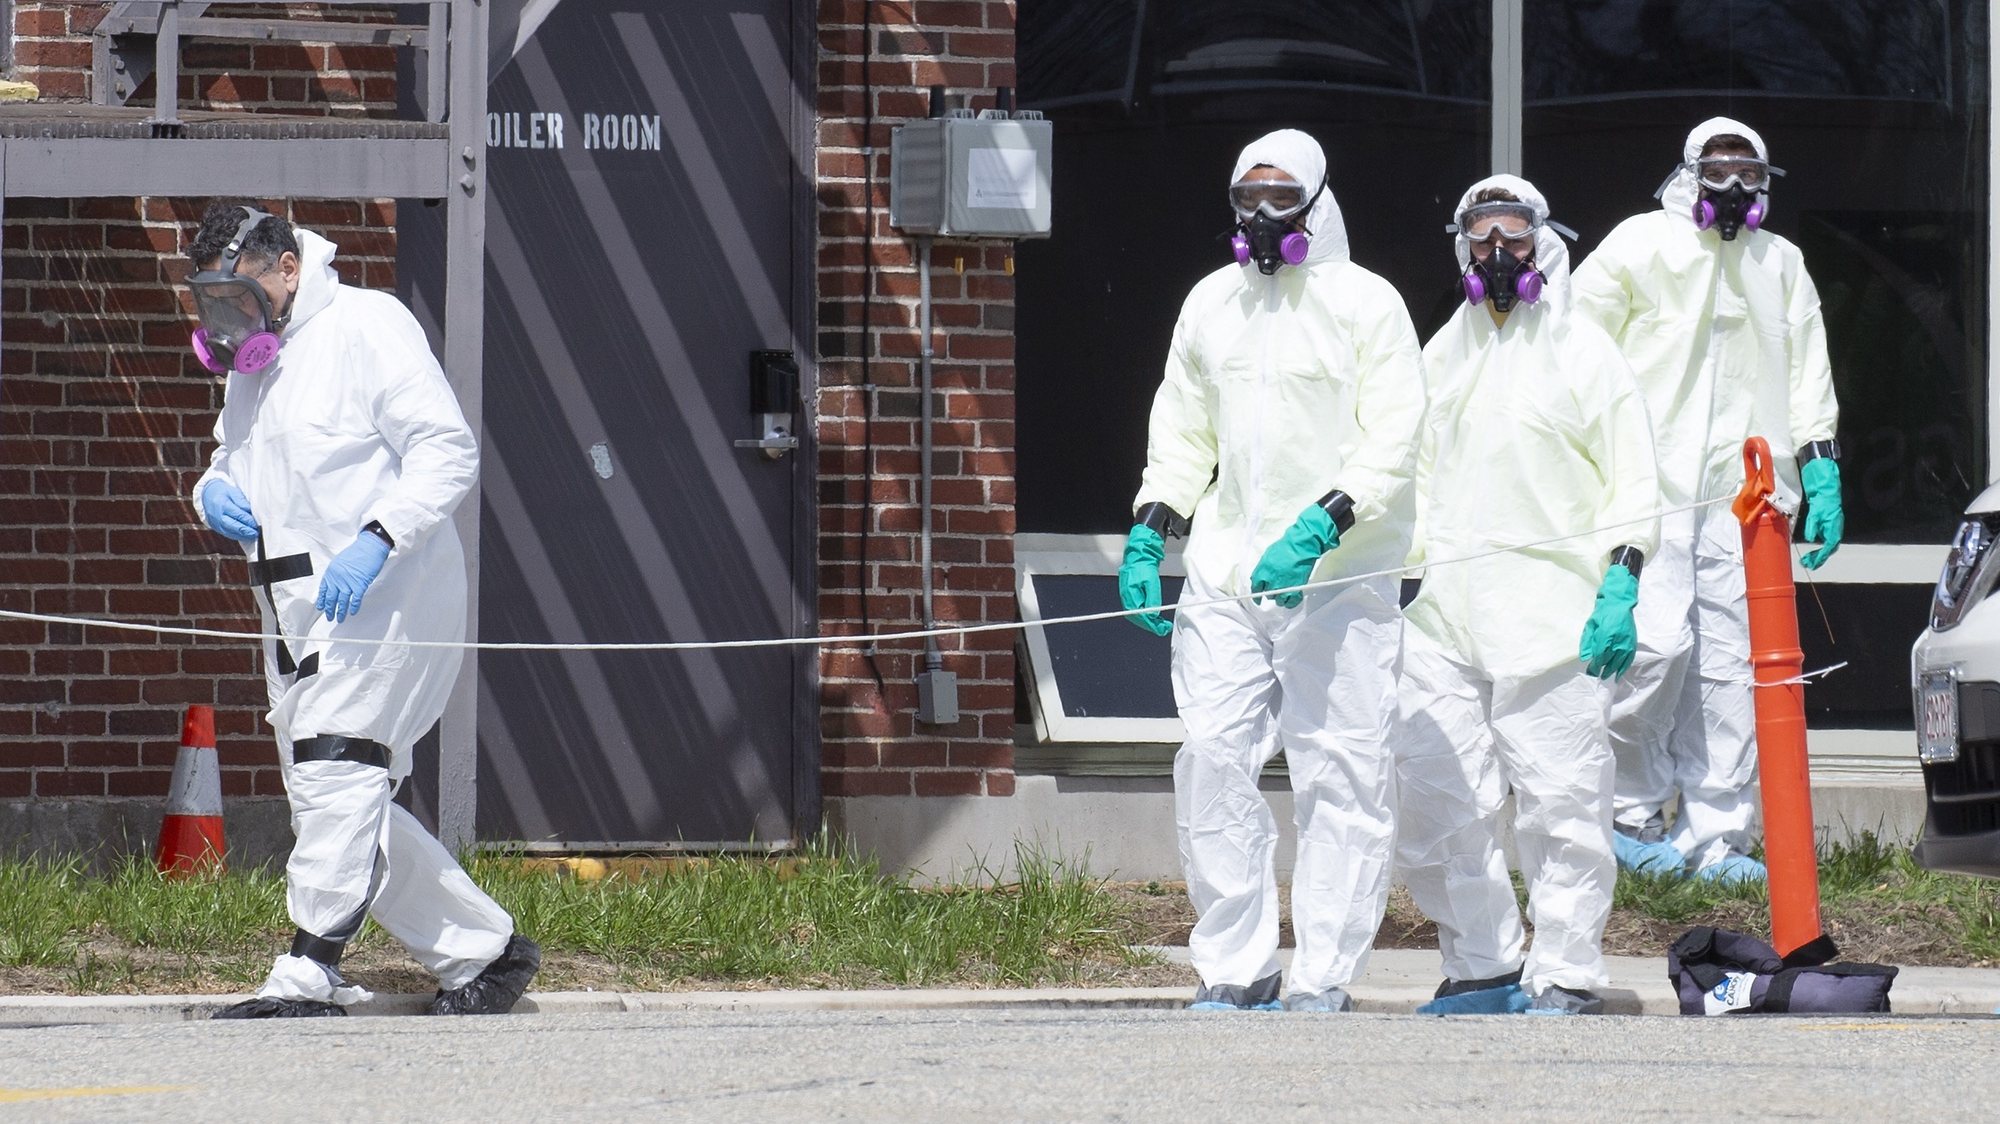 epa08697437 (FILE) - A disinfecting crew in hazmat suits enters the Soldiers&#039; Home in Holyoke, Massachusetts, USA 31 March 2020 (reissued 25 September 2020). According to a statement by Massachusetts attorney general Maura Healey on 25 September 2020, Holyoke Soldiers&#039; Home Superintendent Bennett Walsh and former Medical Director Dr. David Clinton have been charged with five counts each of caretaker who wantonly or recklessly commits or permits bodily injury to an elder or disabled person and caretaker who wantonly or recklessly commits or permits abuse, neglect, or mistreatment to an elder or disabled person. At least 76 residents died at the home due to Covid-19 infections.  EPA/CJ GUNTHER *** Local Caption *** 56173358